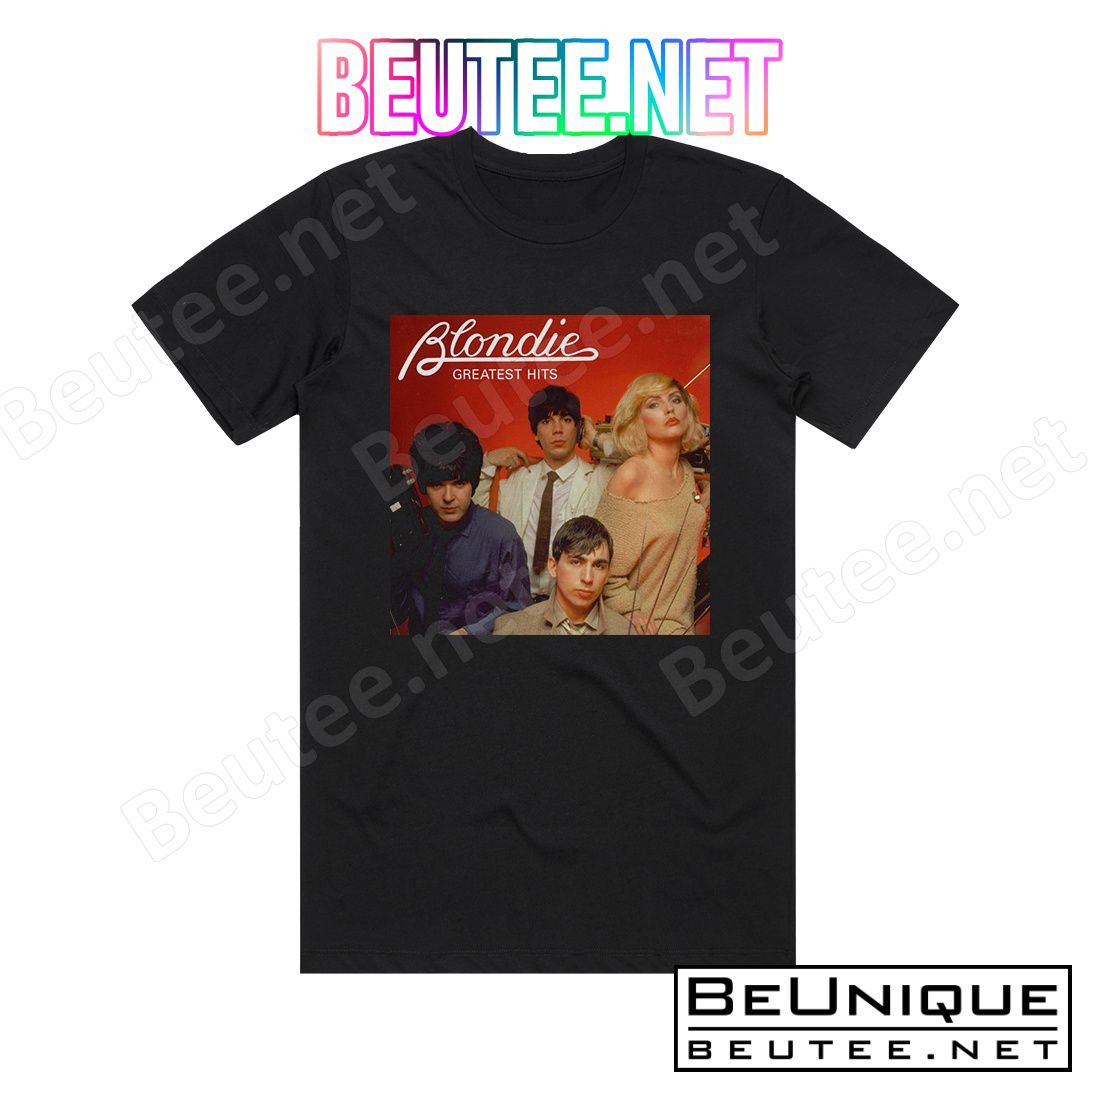 Blondie Greatest Hits Album Cover T-Shirt